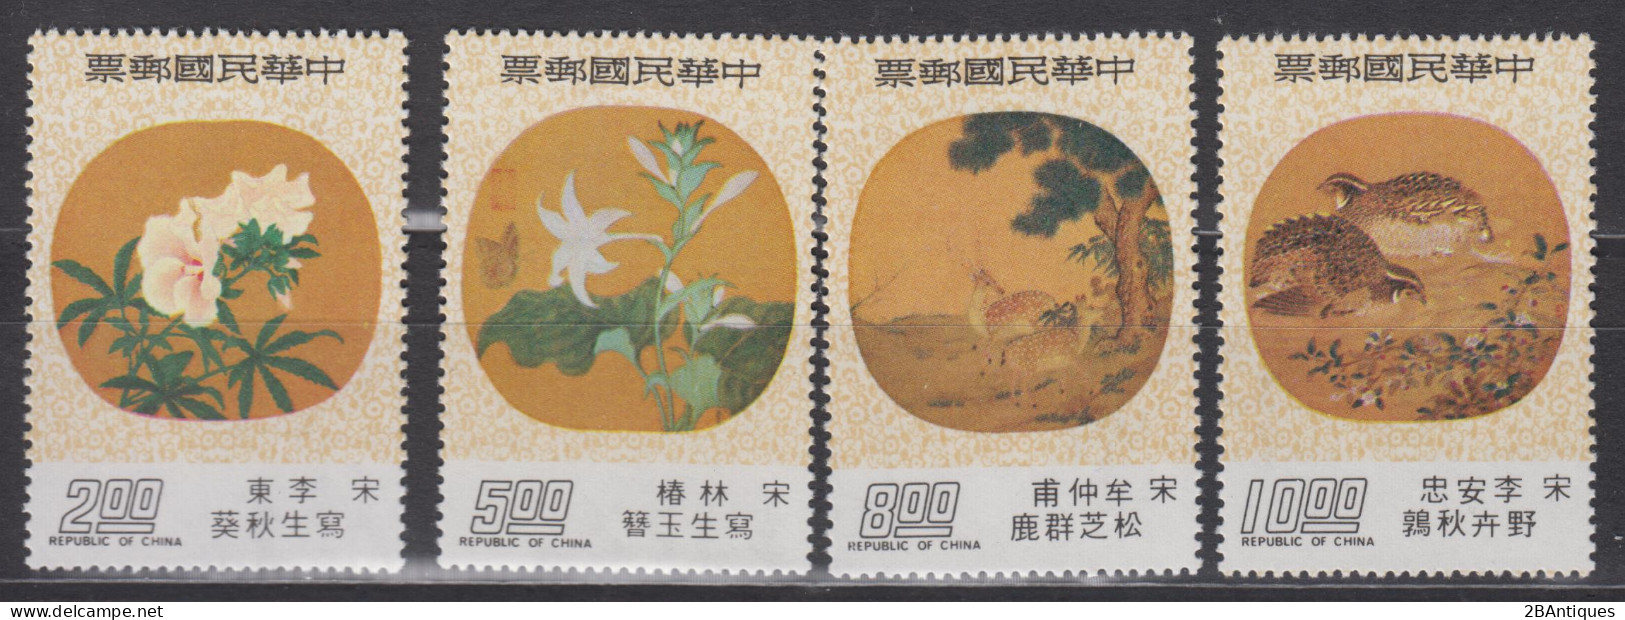 TAIWAN 1976 - Ancient Chinese Moon-shaped Fan Paintings MNH** OG XF - Unused Stamps